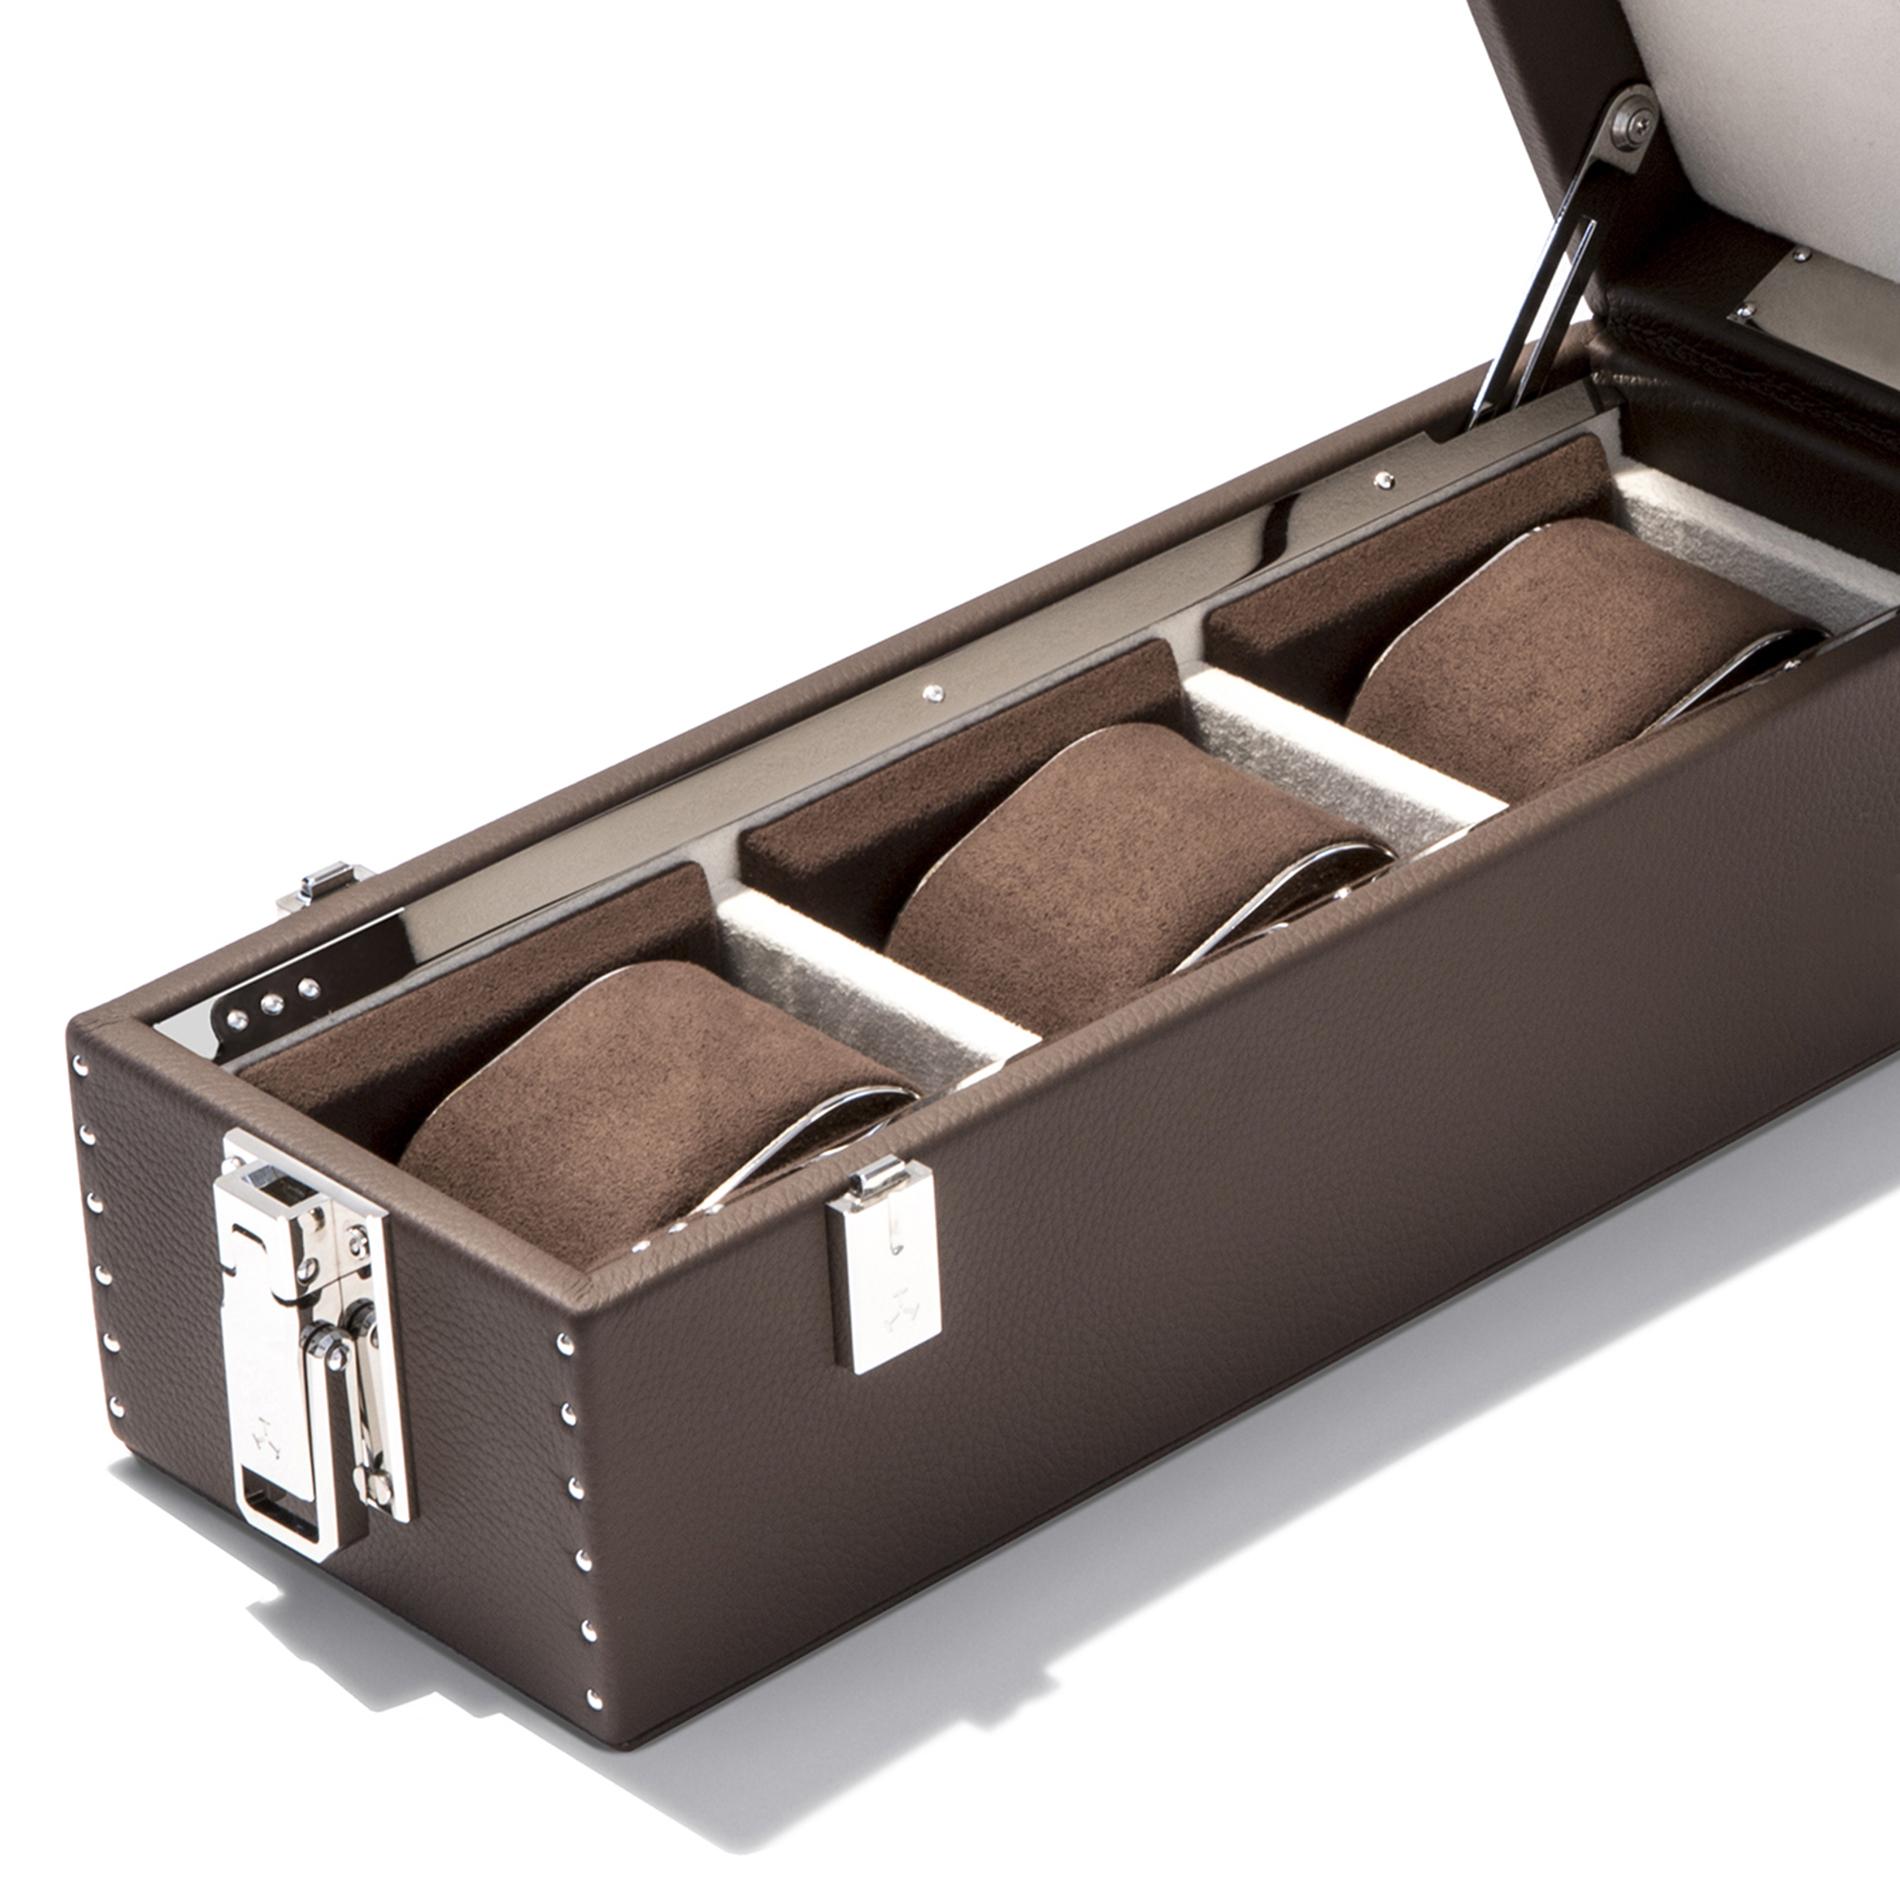 Box luxury triple watch in brown finish for 3 watches.
Covered with brown cowhide leather sheathing, box with
details and finishings in polished nickel-plated brass.
Upholstery and padding in dinamica Slate brown and silver
gray microfiber. With